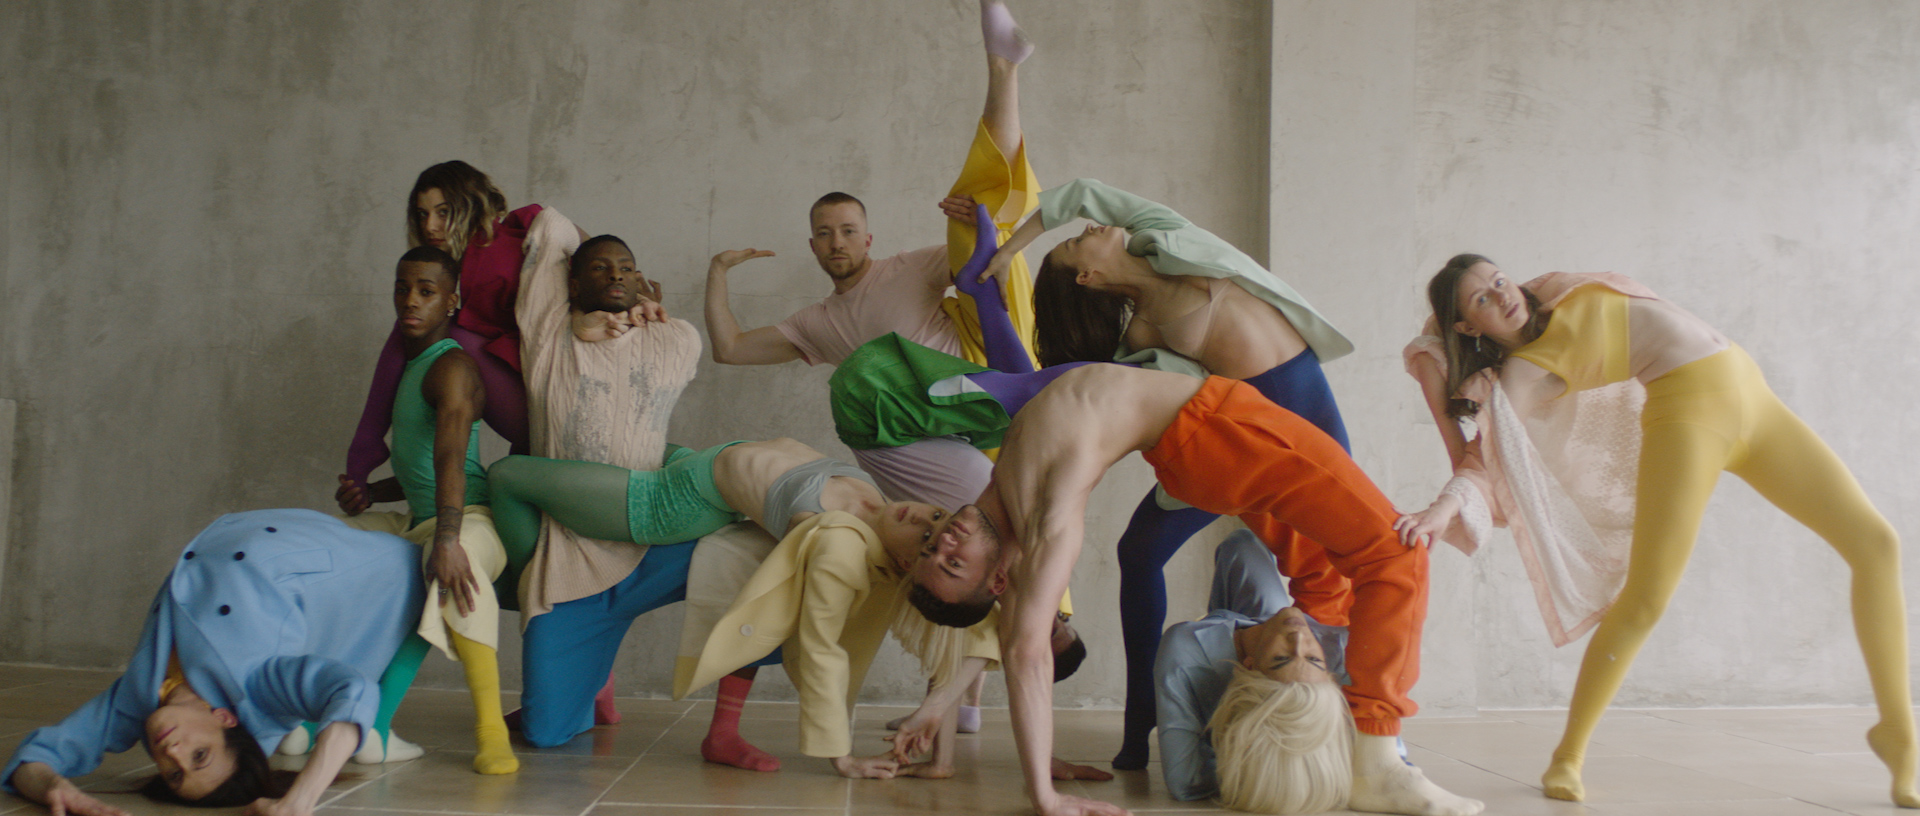 'Voguing' and Self-Expression Are at the Heart of This Nowness Film